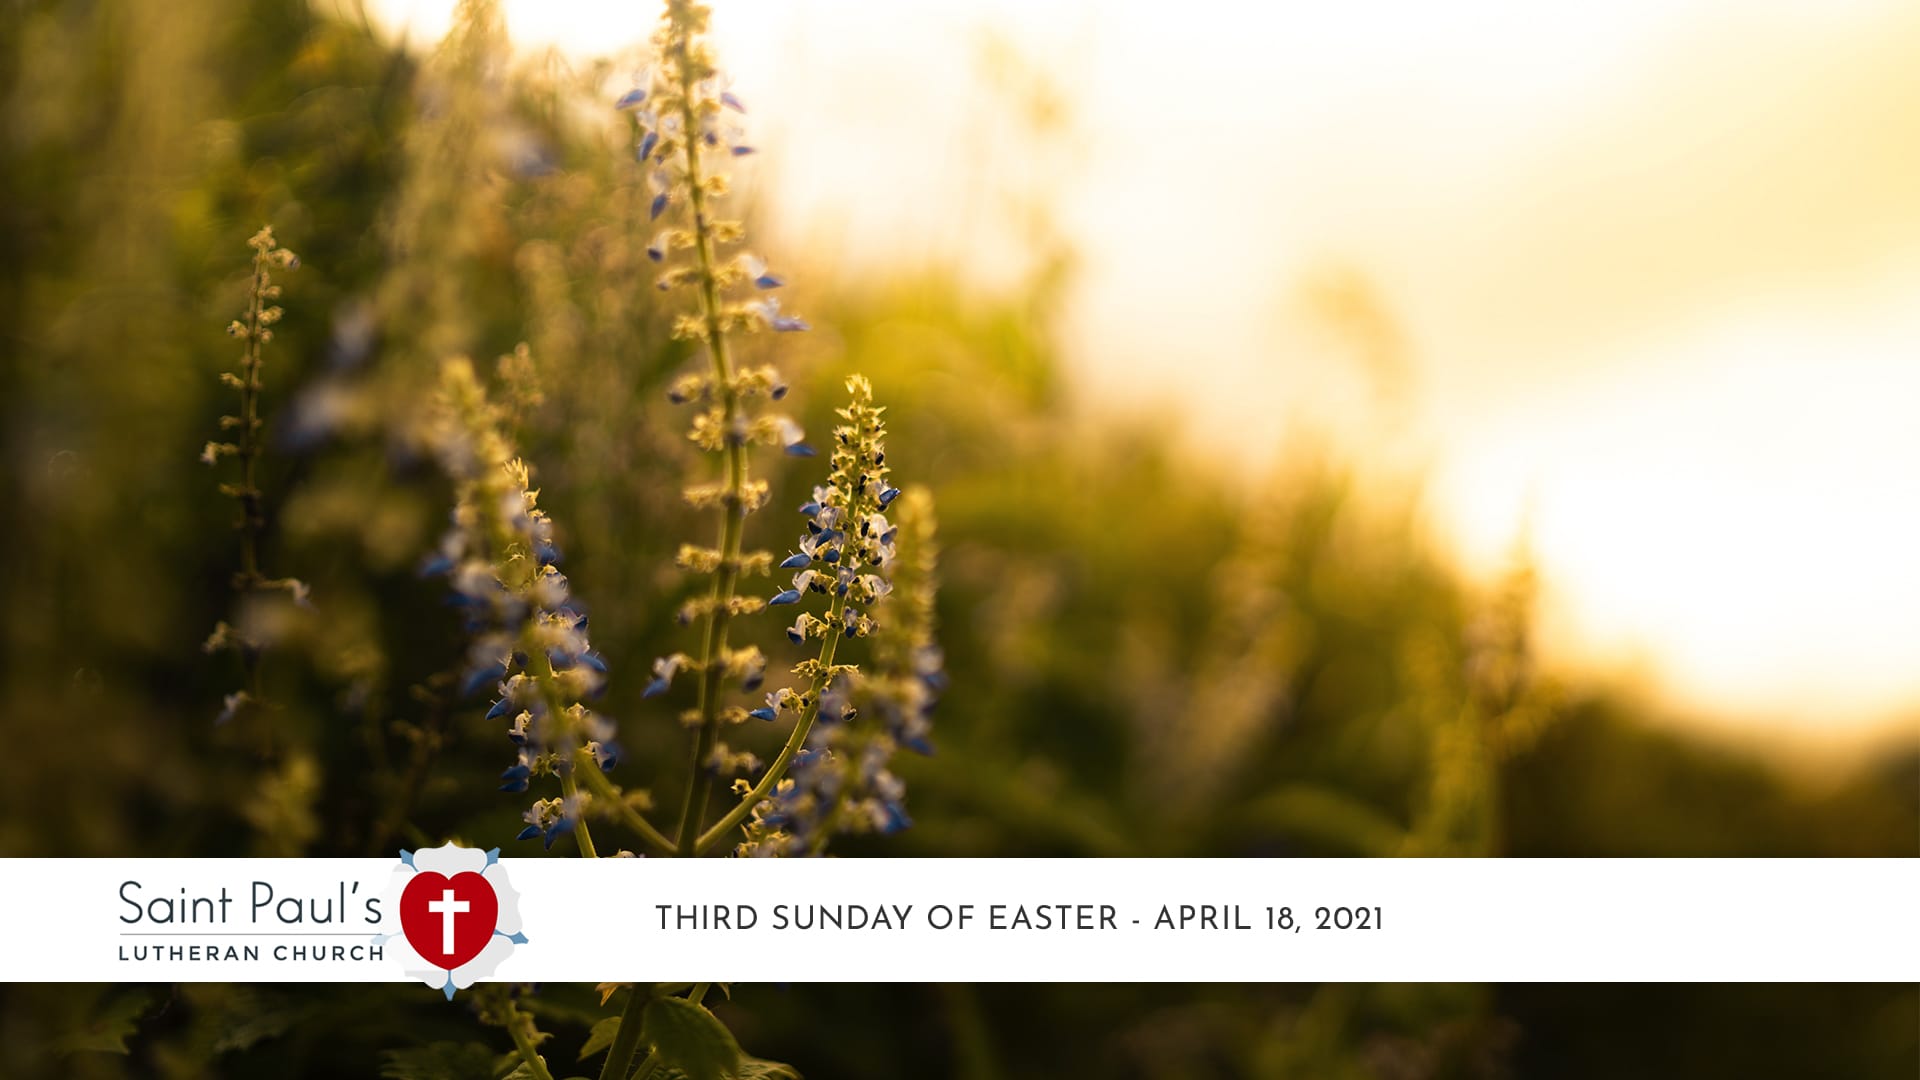 Third Sunday of Easter Service – April 18, 2021